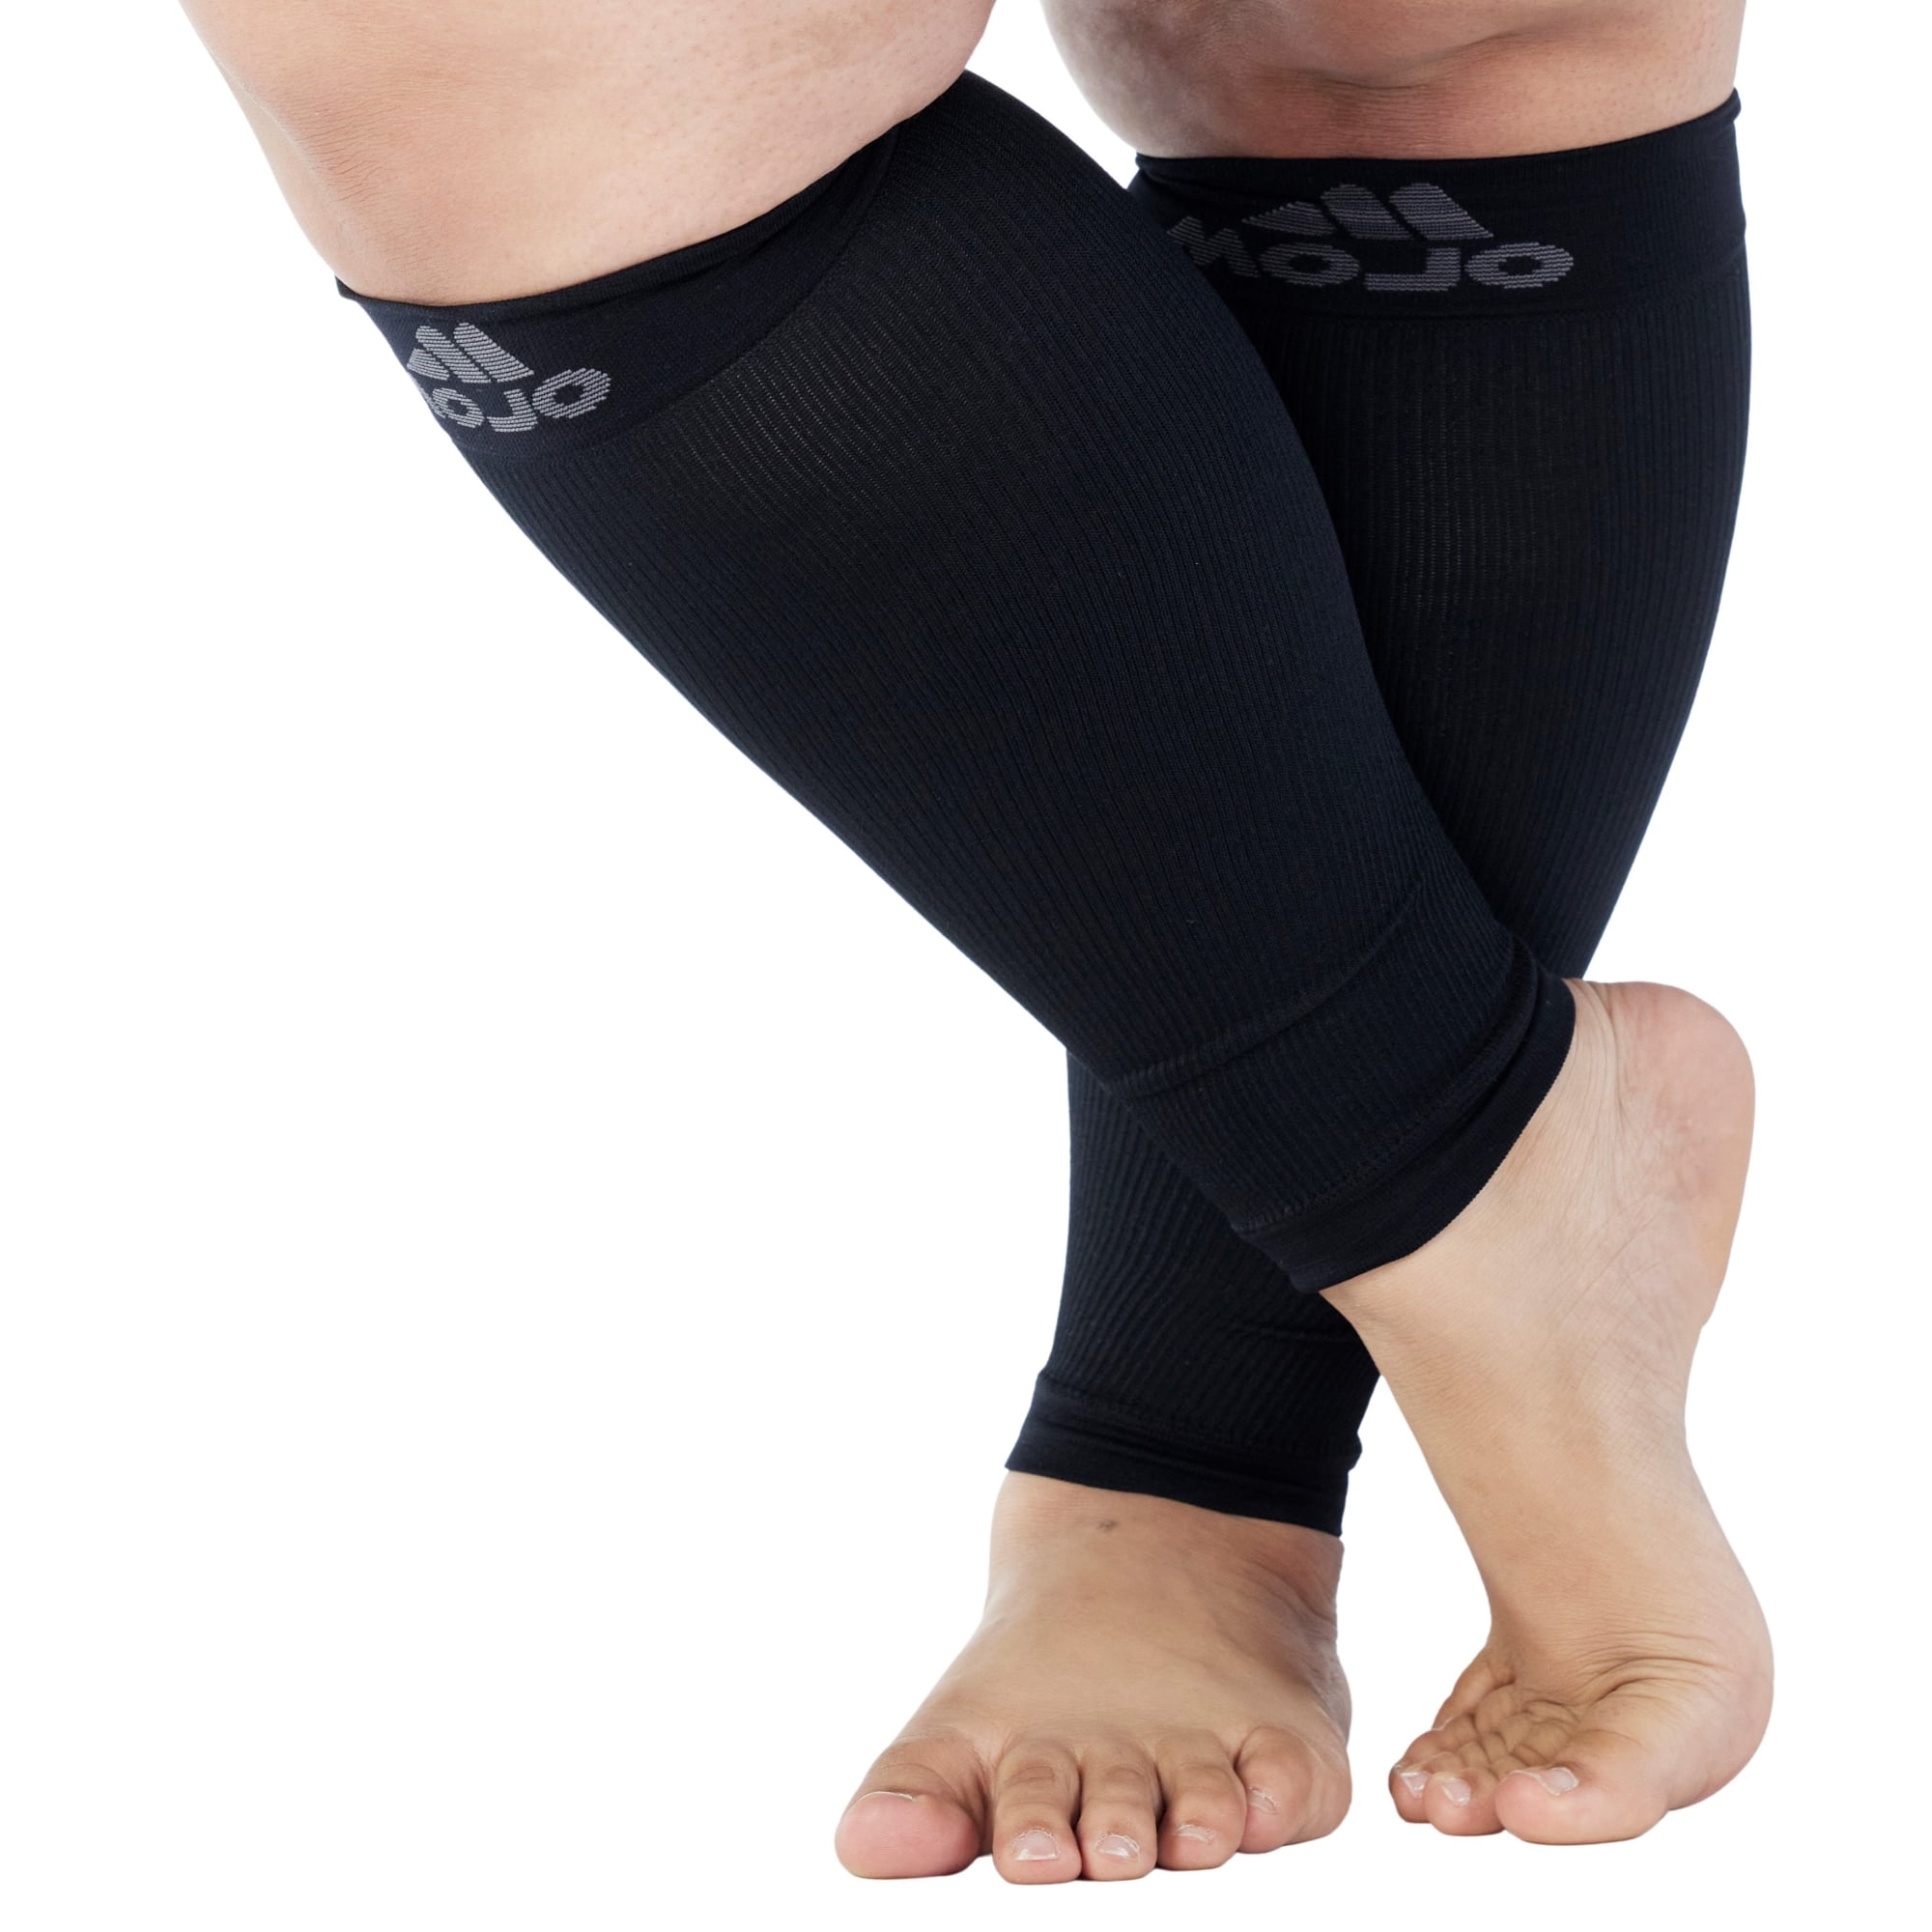 1000 Mile Compression And Recovery Calcetines para correr Unisex adulto 